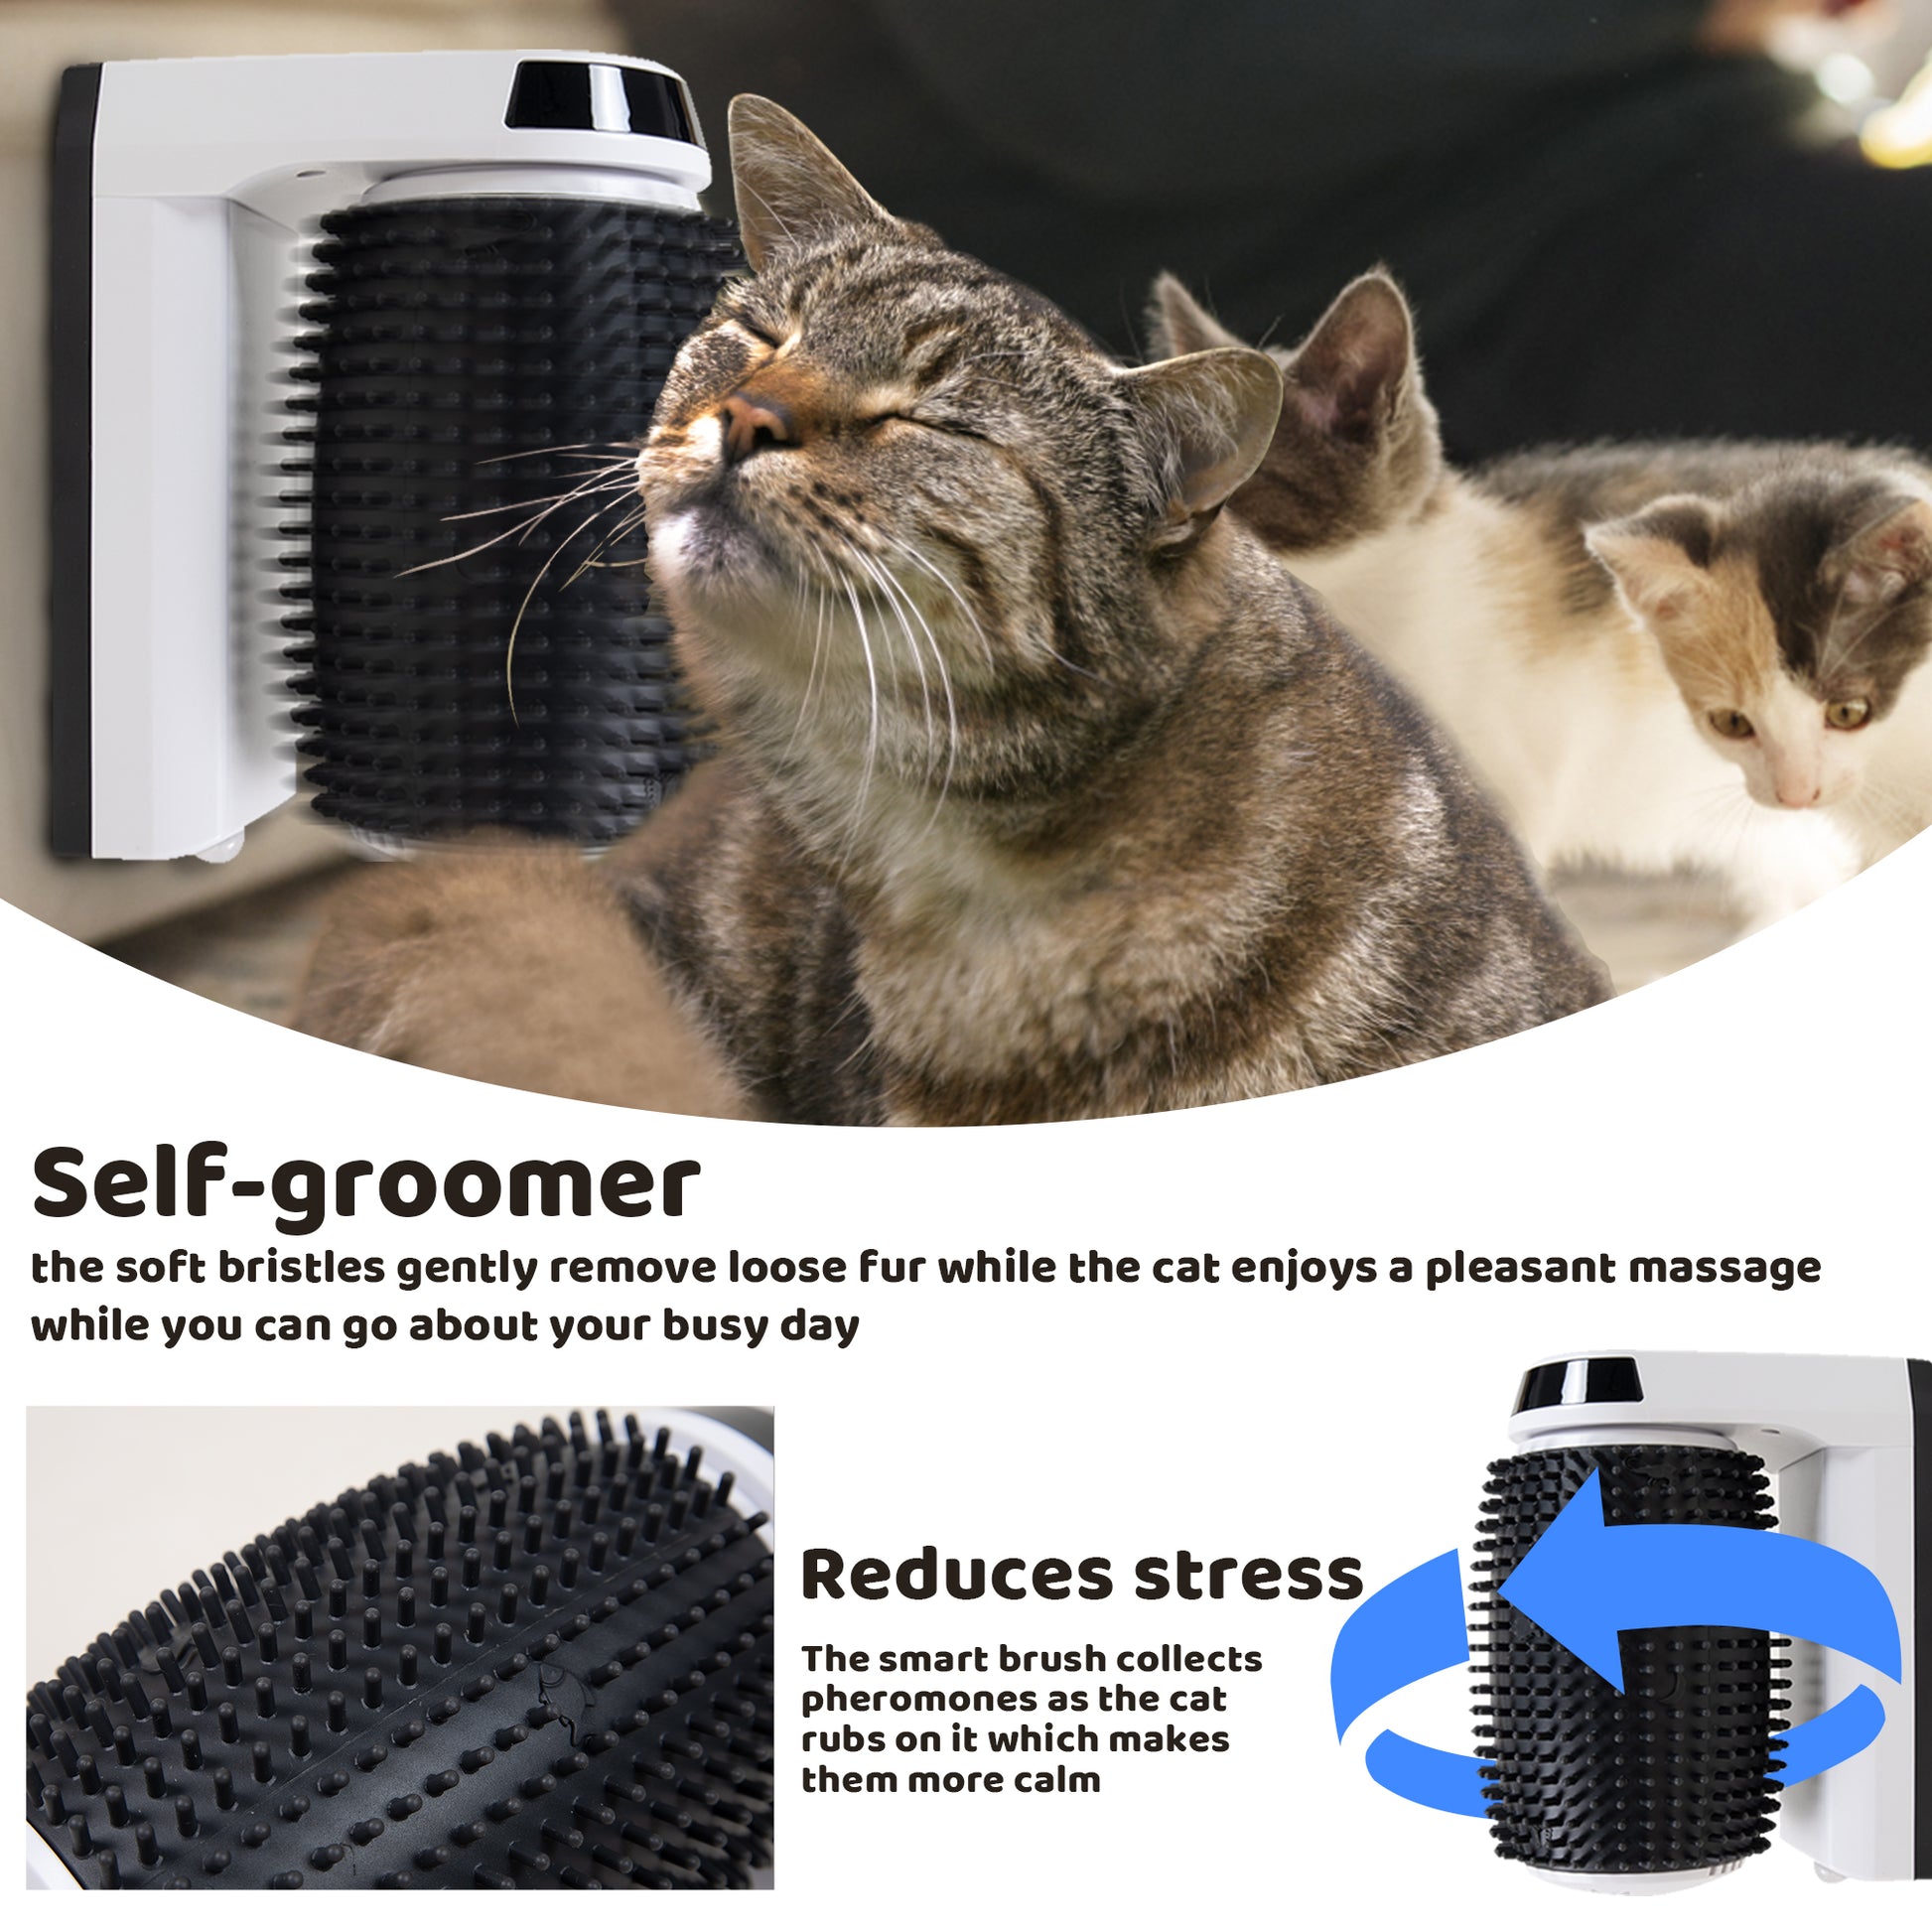 The soft bristles on our self-groomer gently removes loose fur while the cat enjoys a pleasant massage while you can go about your busy day. The brush reduces stress by collecting pheromones as the cat rubs on it which makes them more calm.